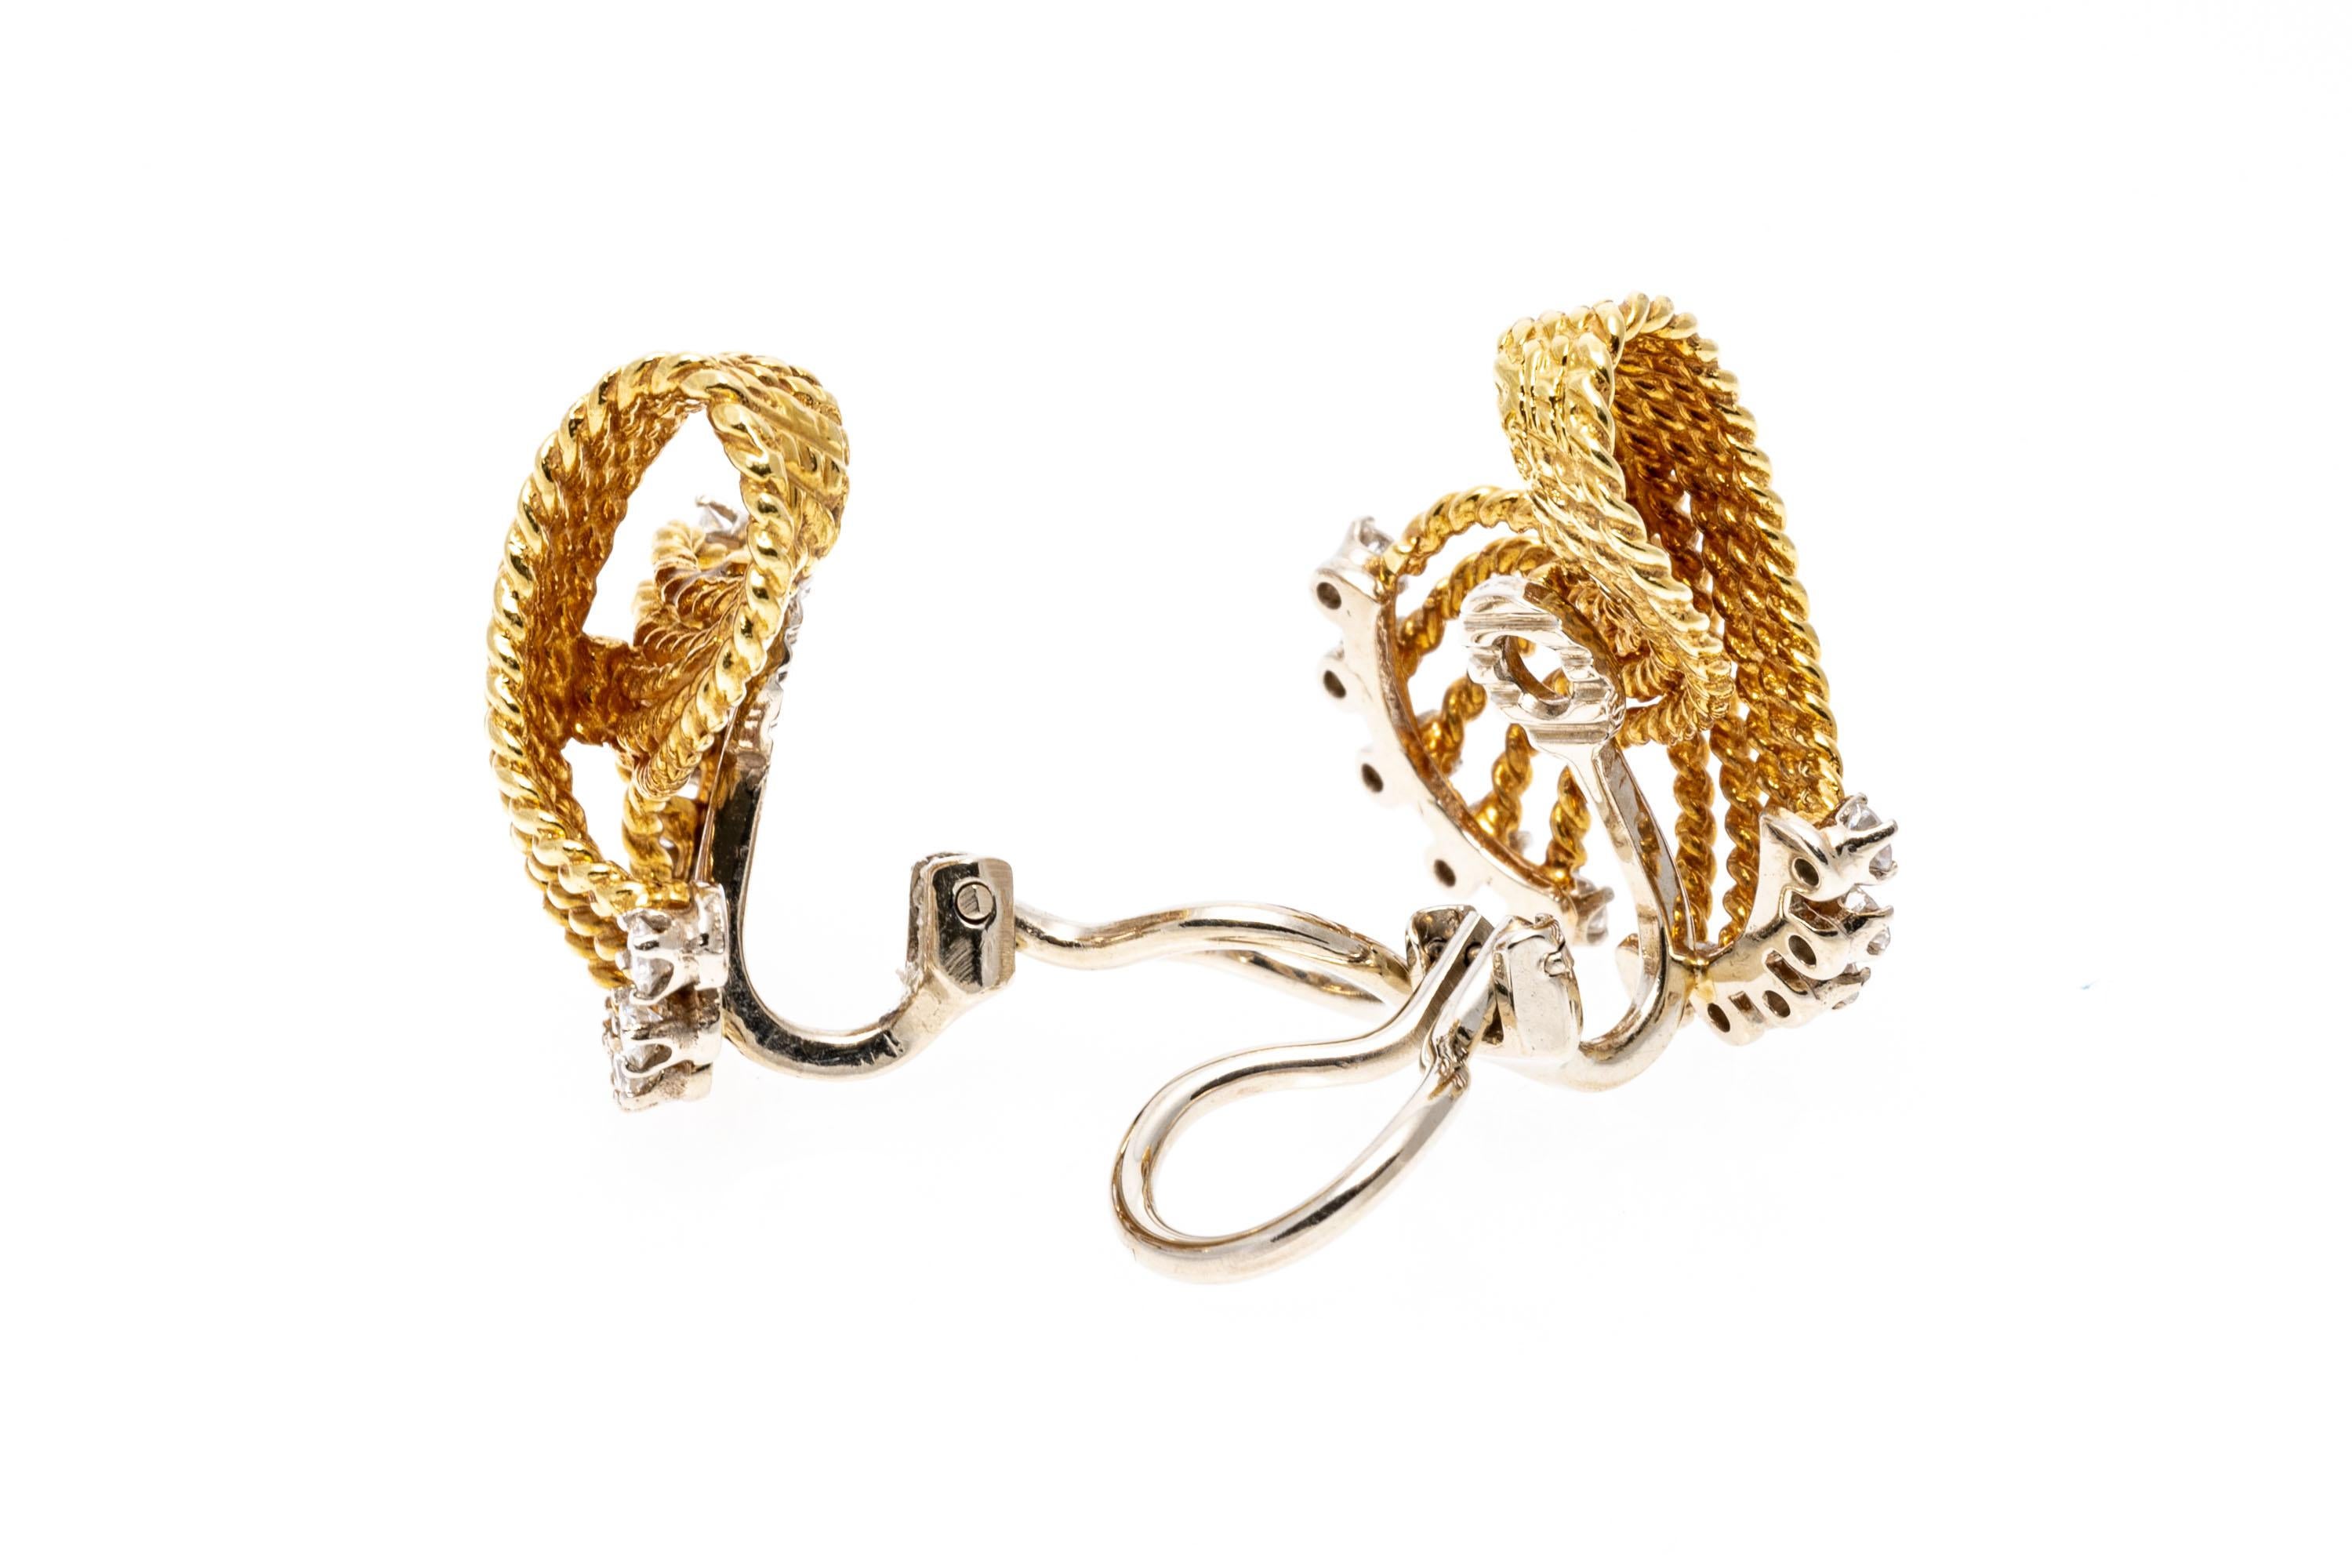 18K Yellow Gold Braided Folded Knot Earrings with Diamonds, App. 0.50 TCW In Good Condition For Sale In Southport, CT